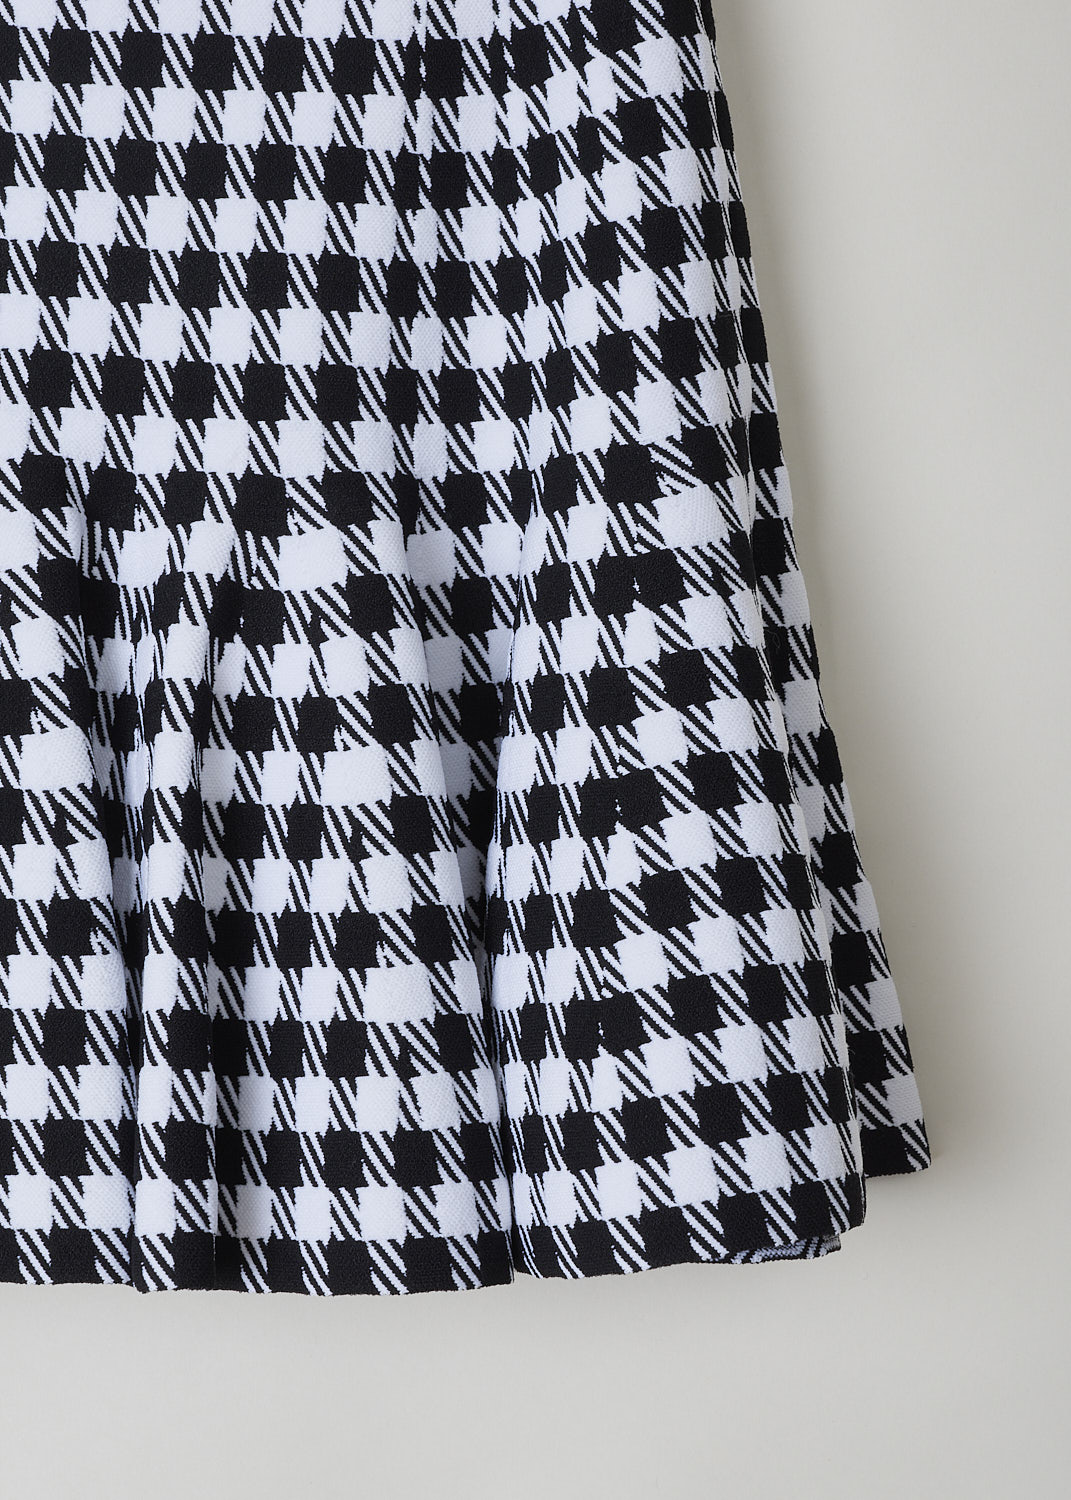 ALAÏA, FIT-AND-FLARE HOUNDSTOOTH MINI SKIRT, Black, White, Print, Detail, This fit-and-flare mini skirt has a magnified black and white Houndstooth print throughout. The skirt sits high on the waist and flares out. A concealed side zip functions as the closure function. The skirt is fully elasticated.

